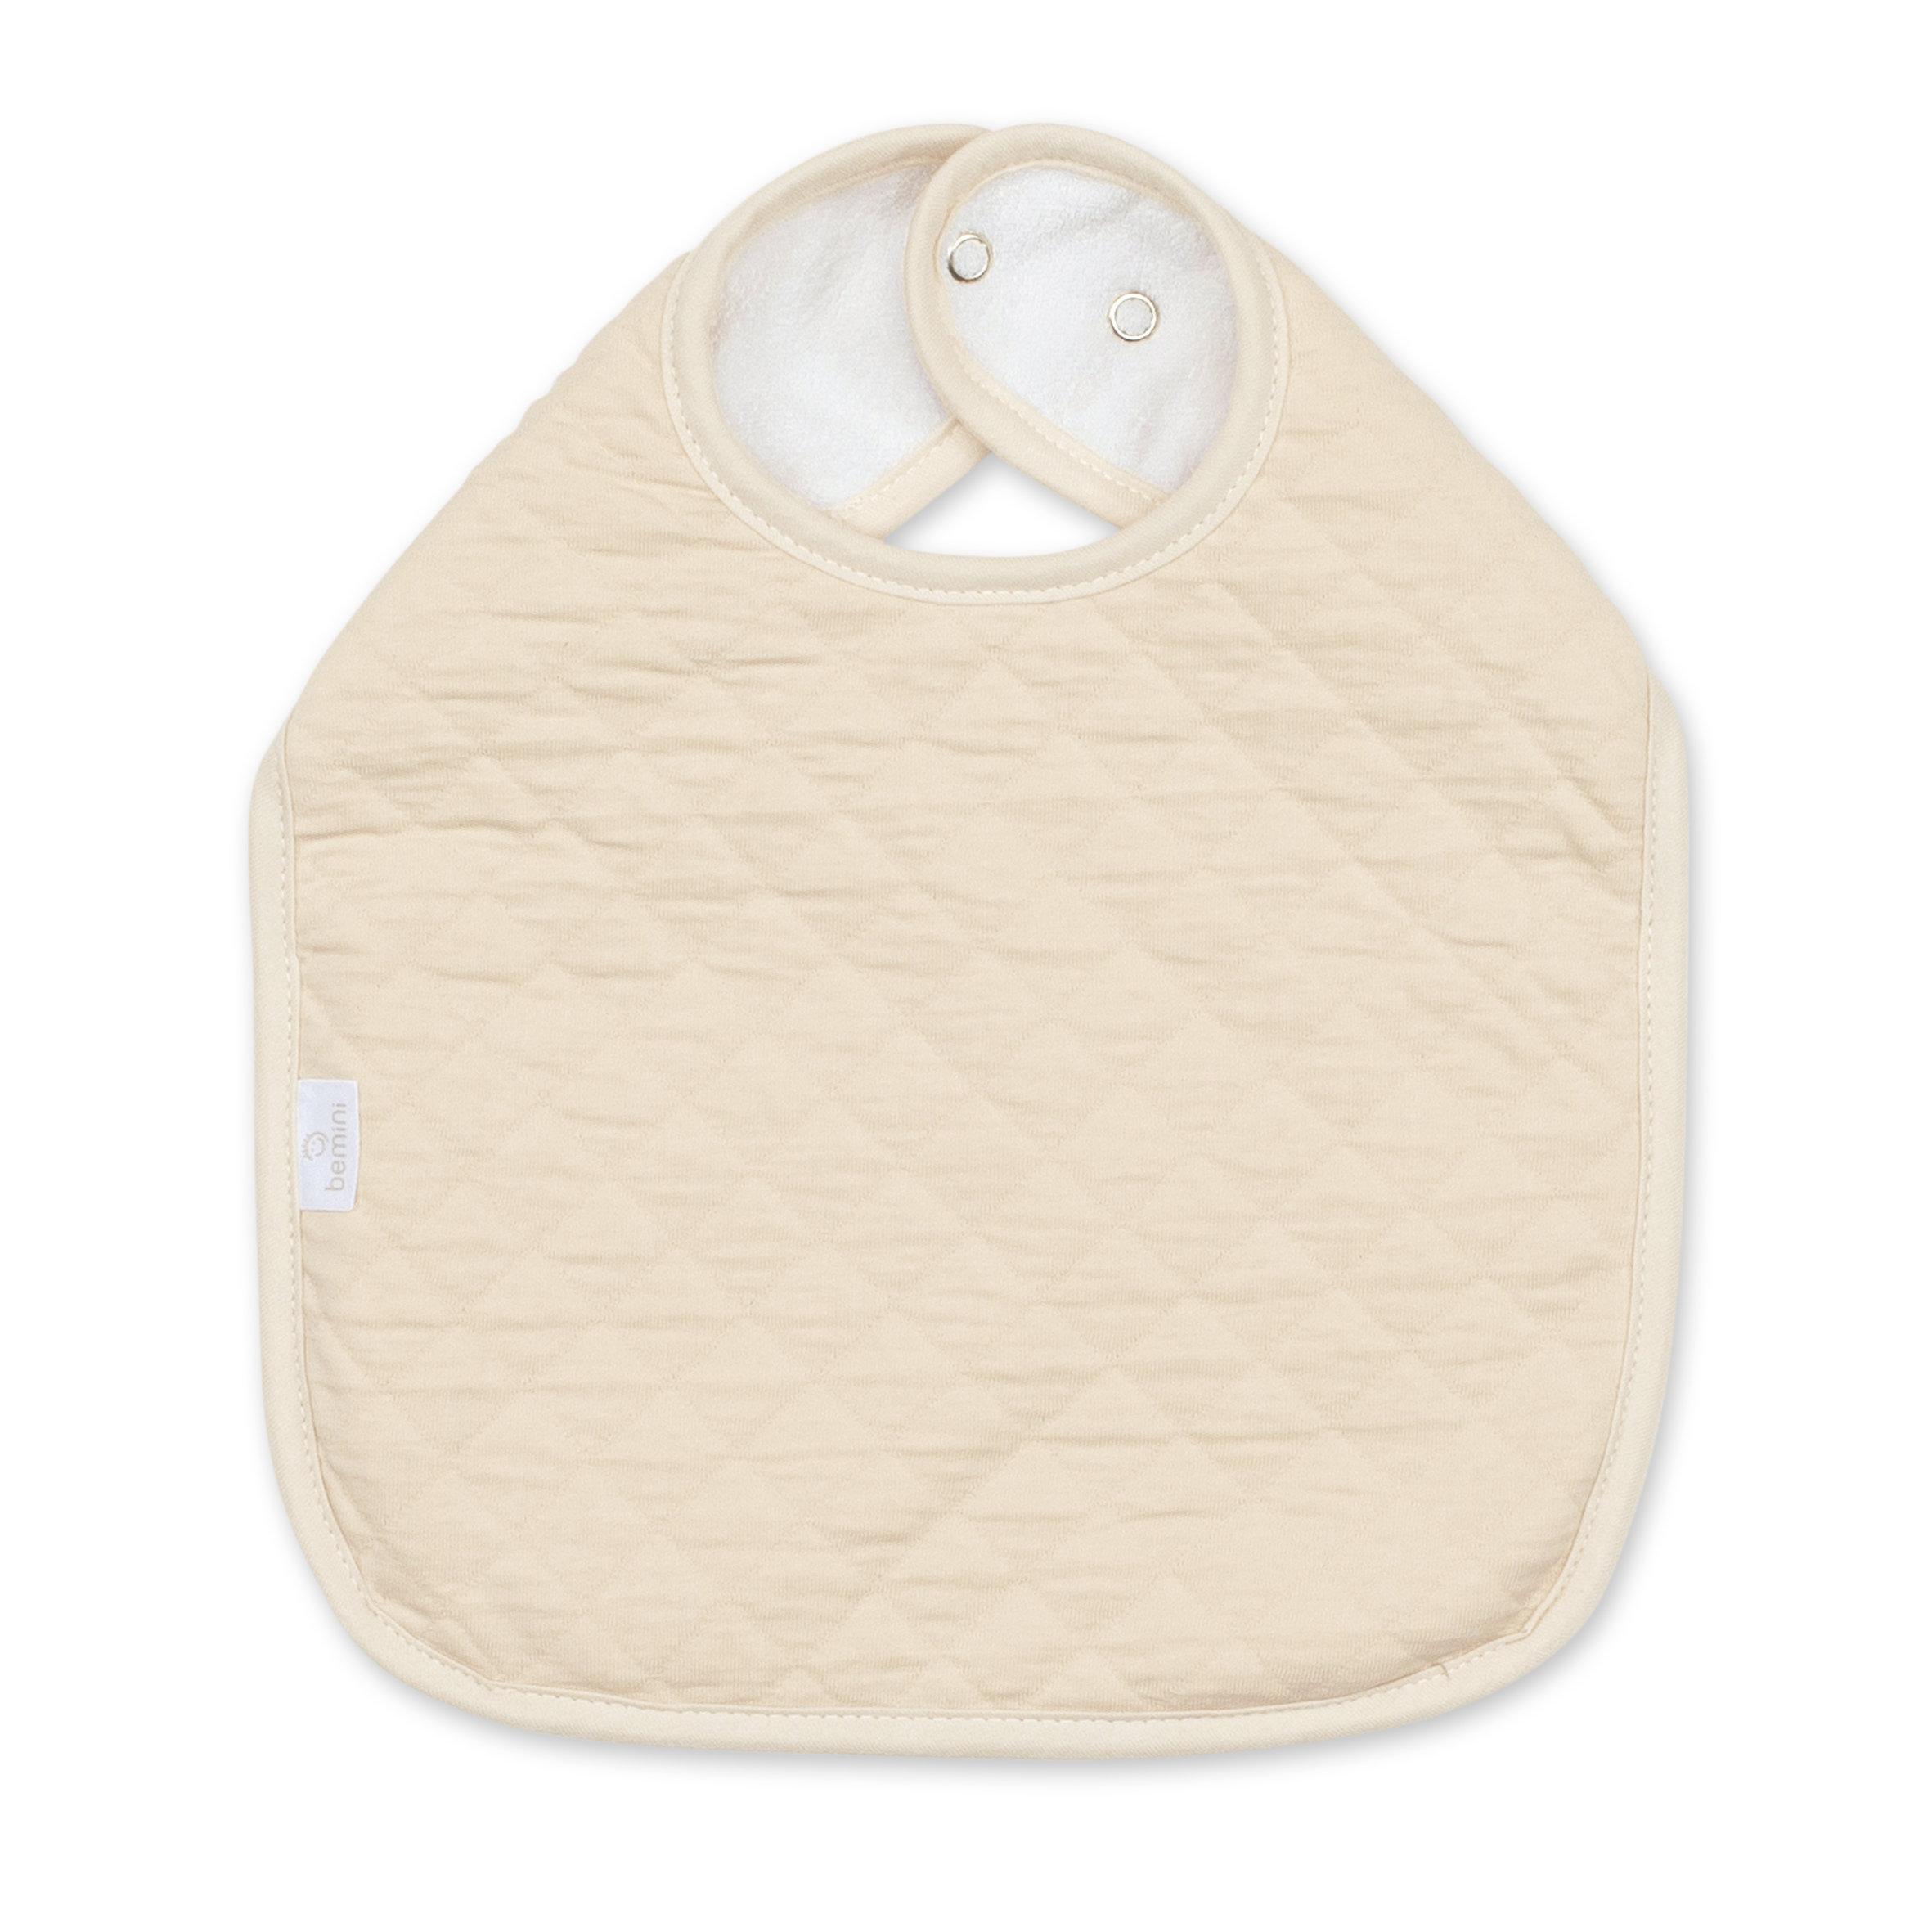 Bavoir waterproof Pady quilted jersey 37cm QUILT Cream